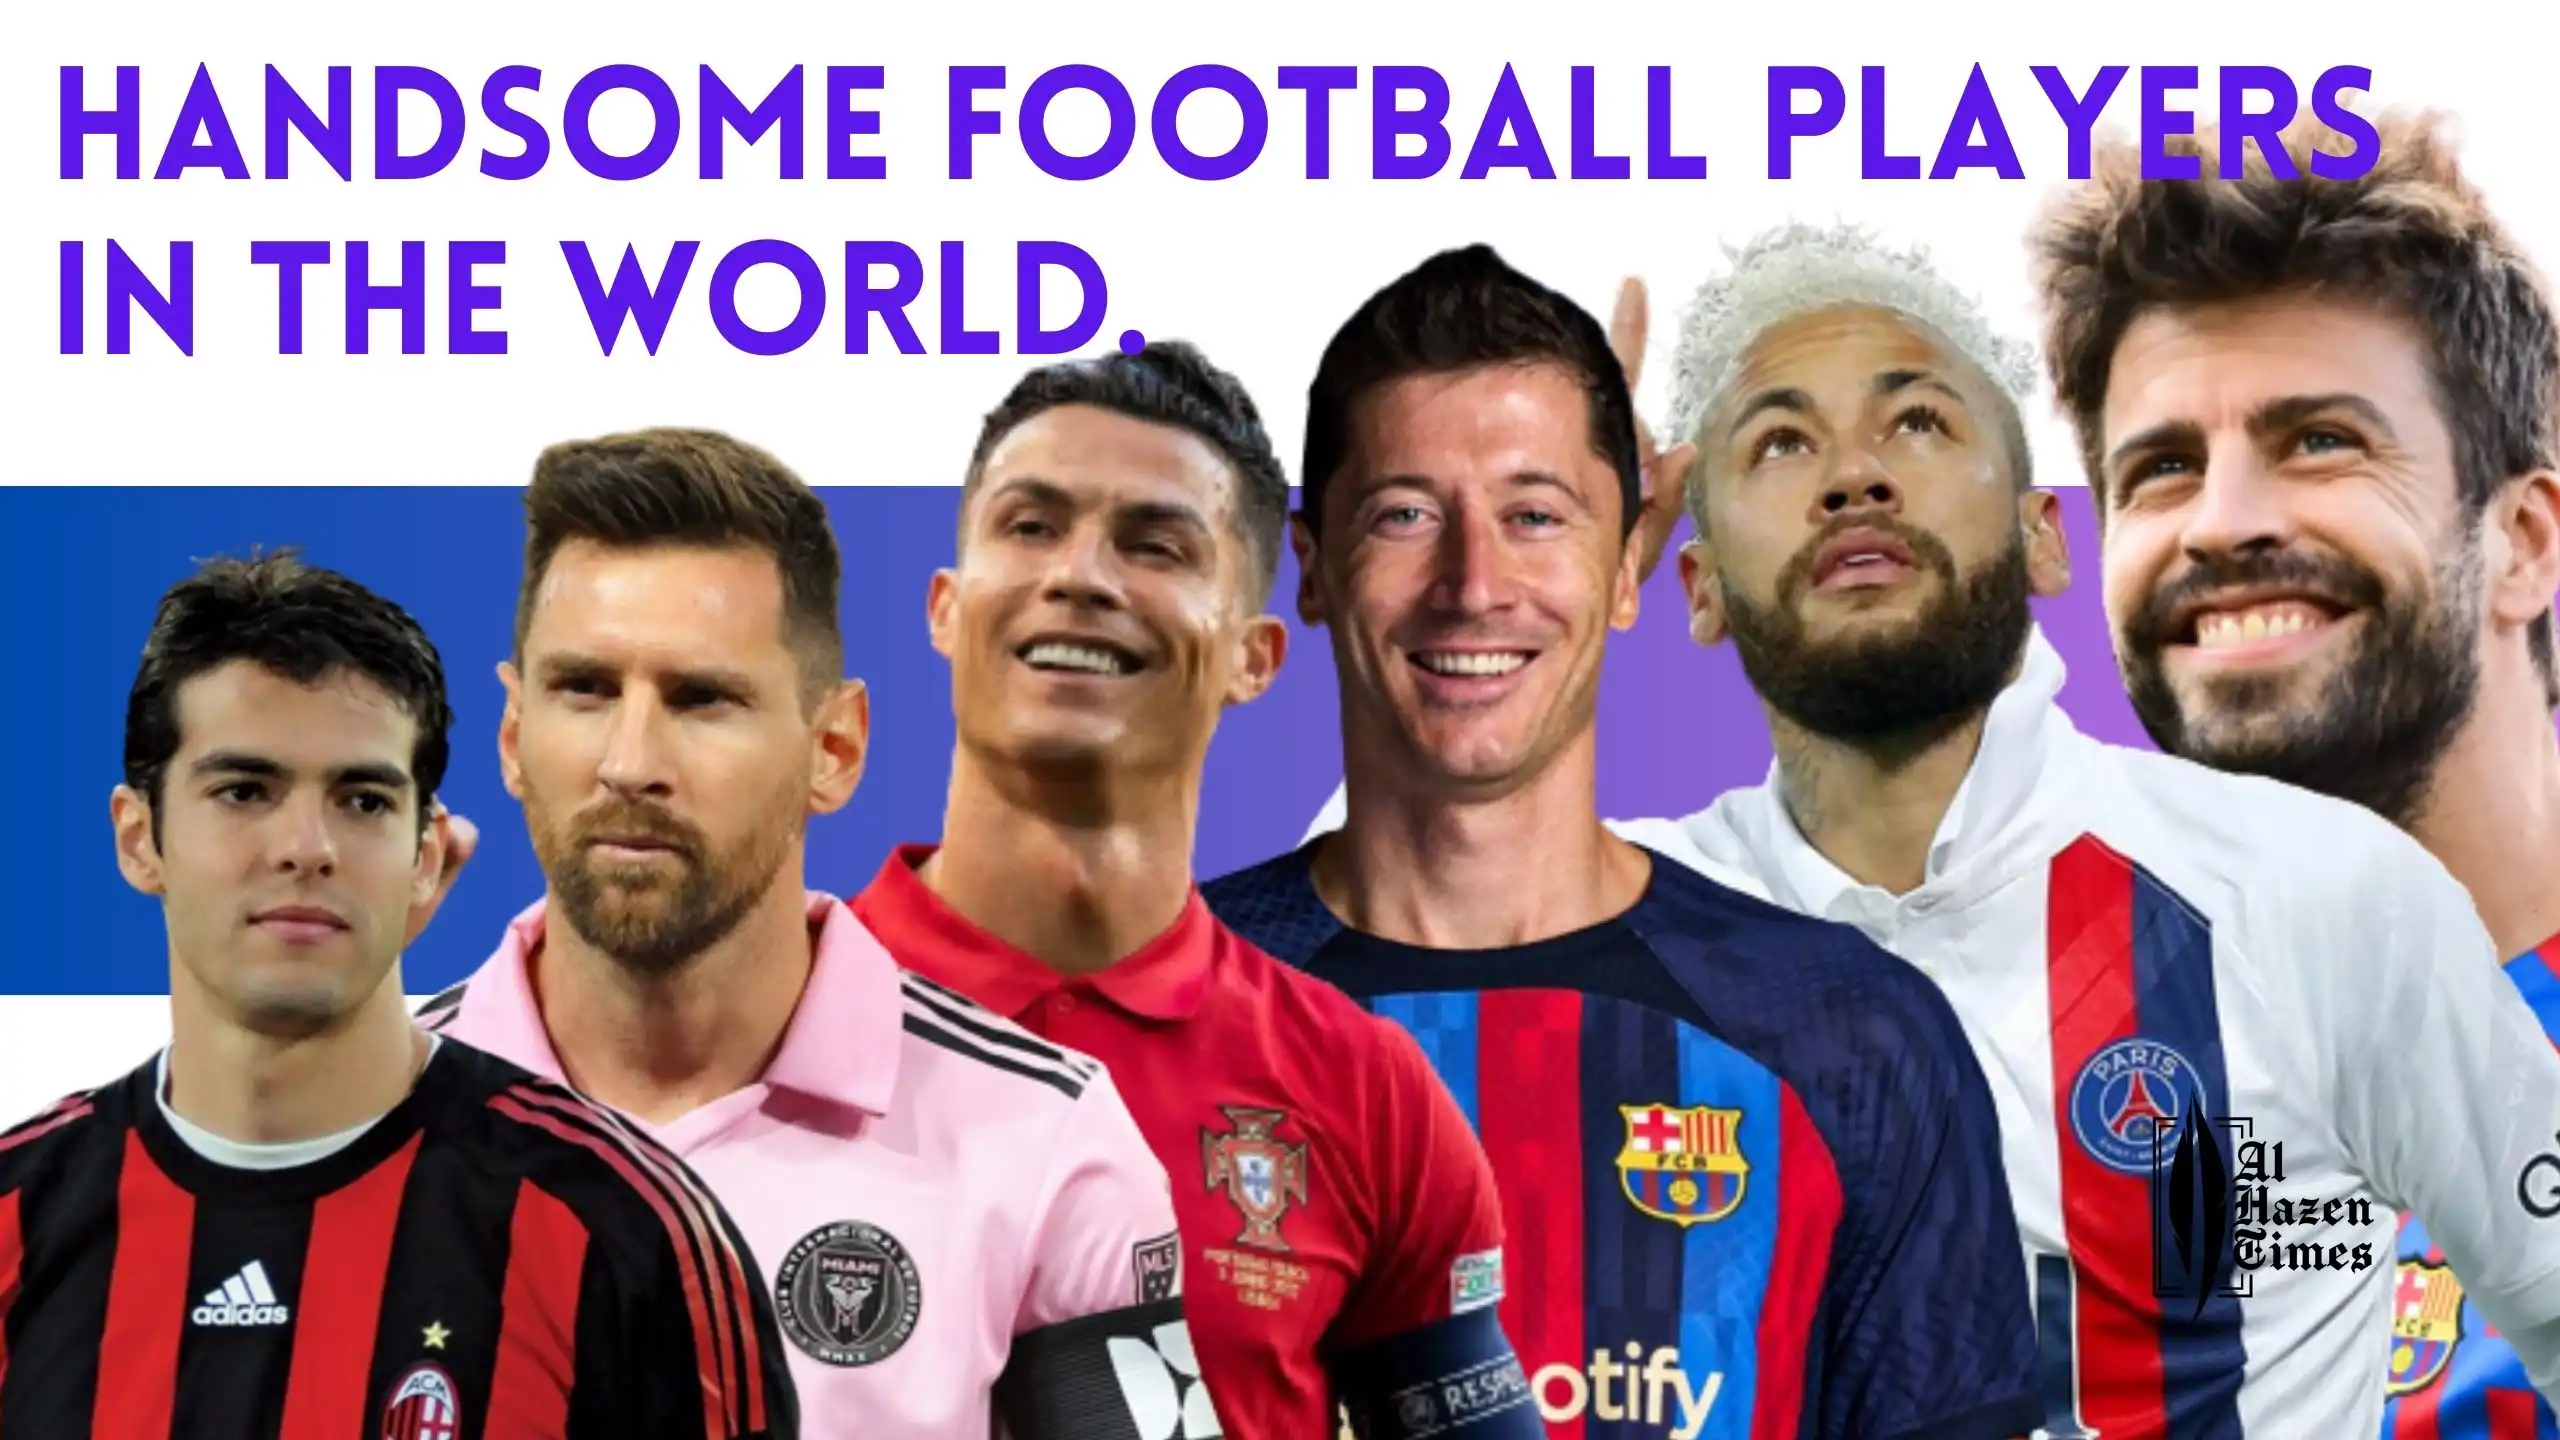 Top 9 Most Handsomе Football Playеrs in the World